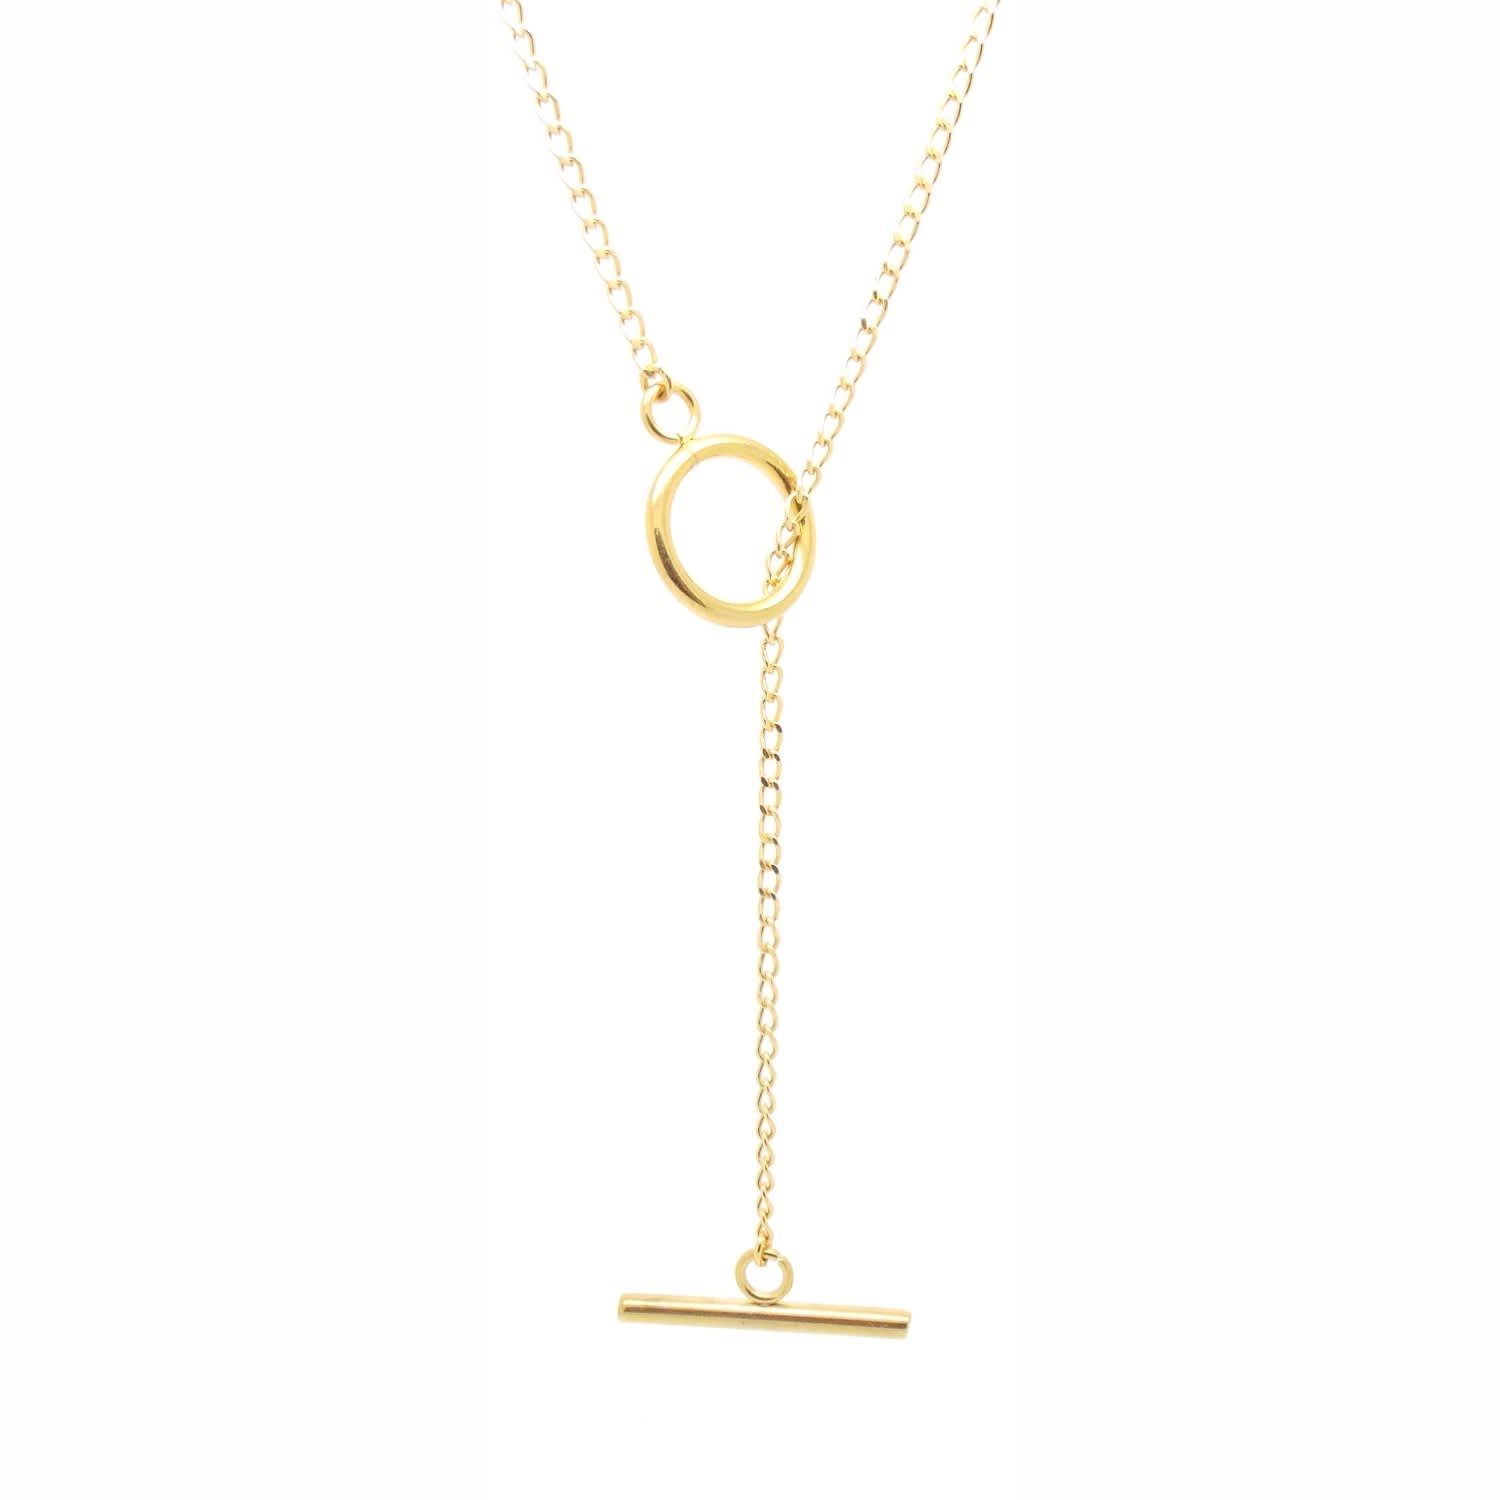 Salome X Stephanie Waxberg Gold Lariat Necklace by SALOME | Wolf and Badger (Global excl. US)